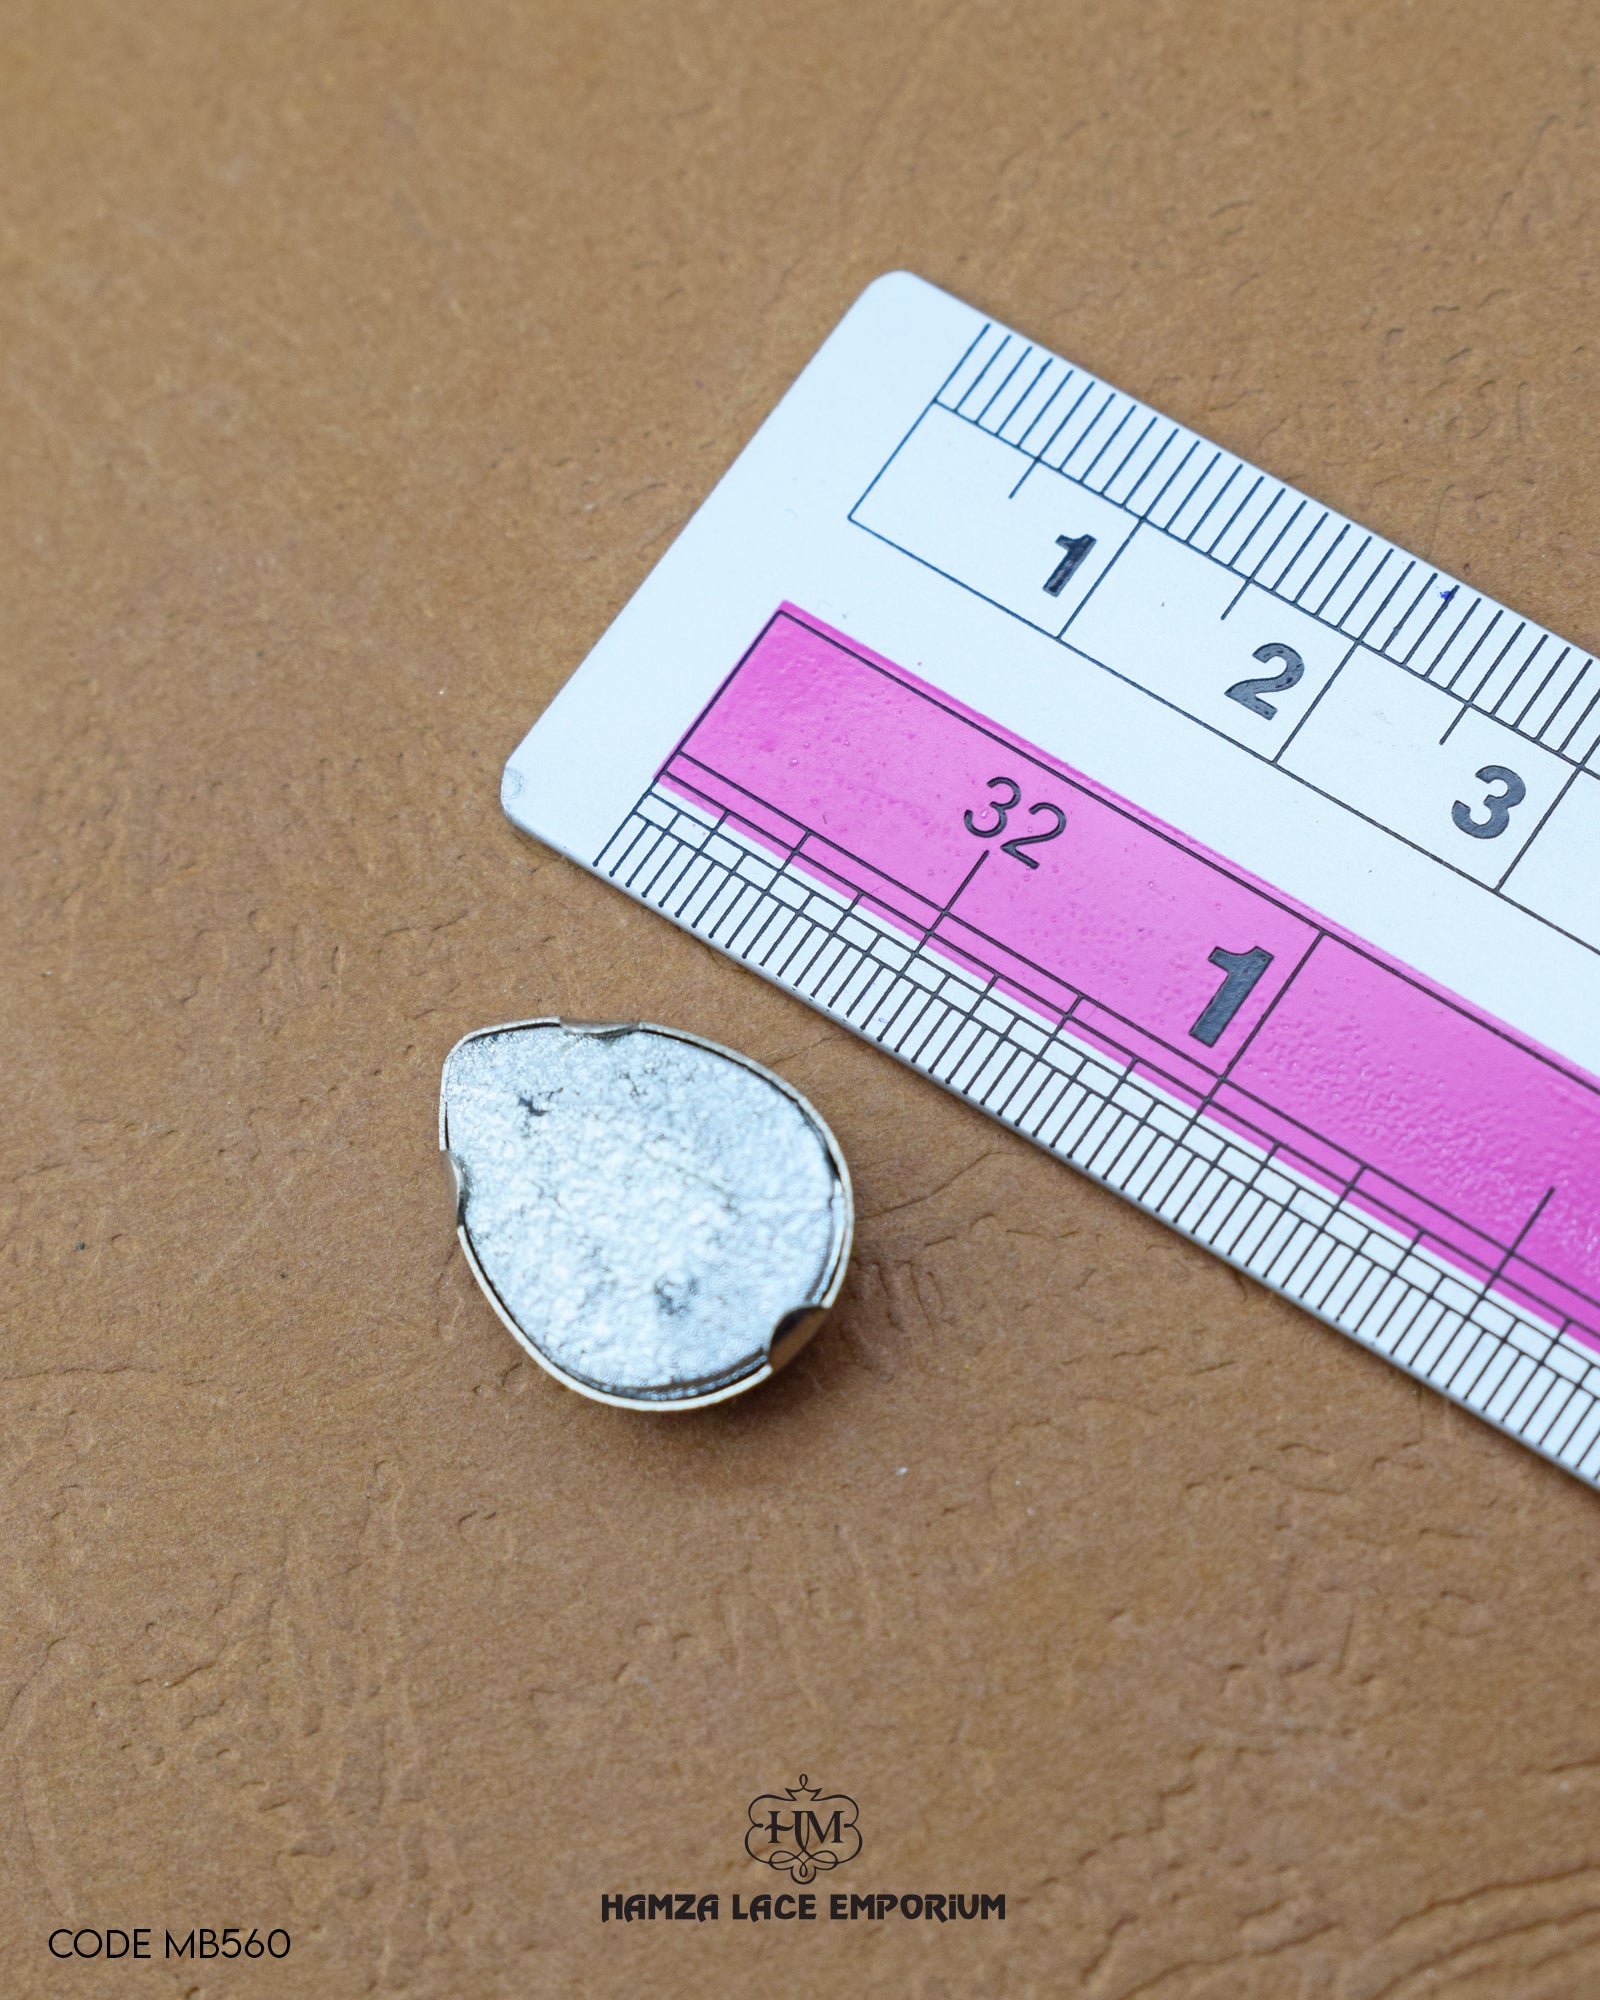 The size of the 'Metal Button MB560' is measured using a ruler.